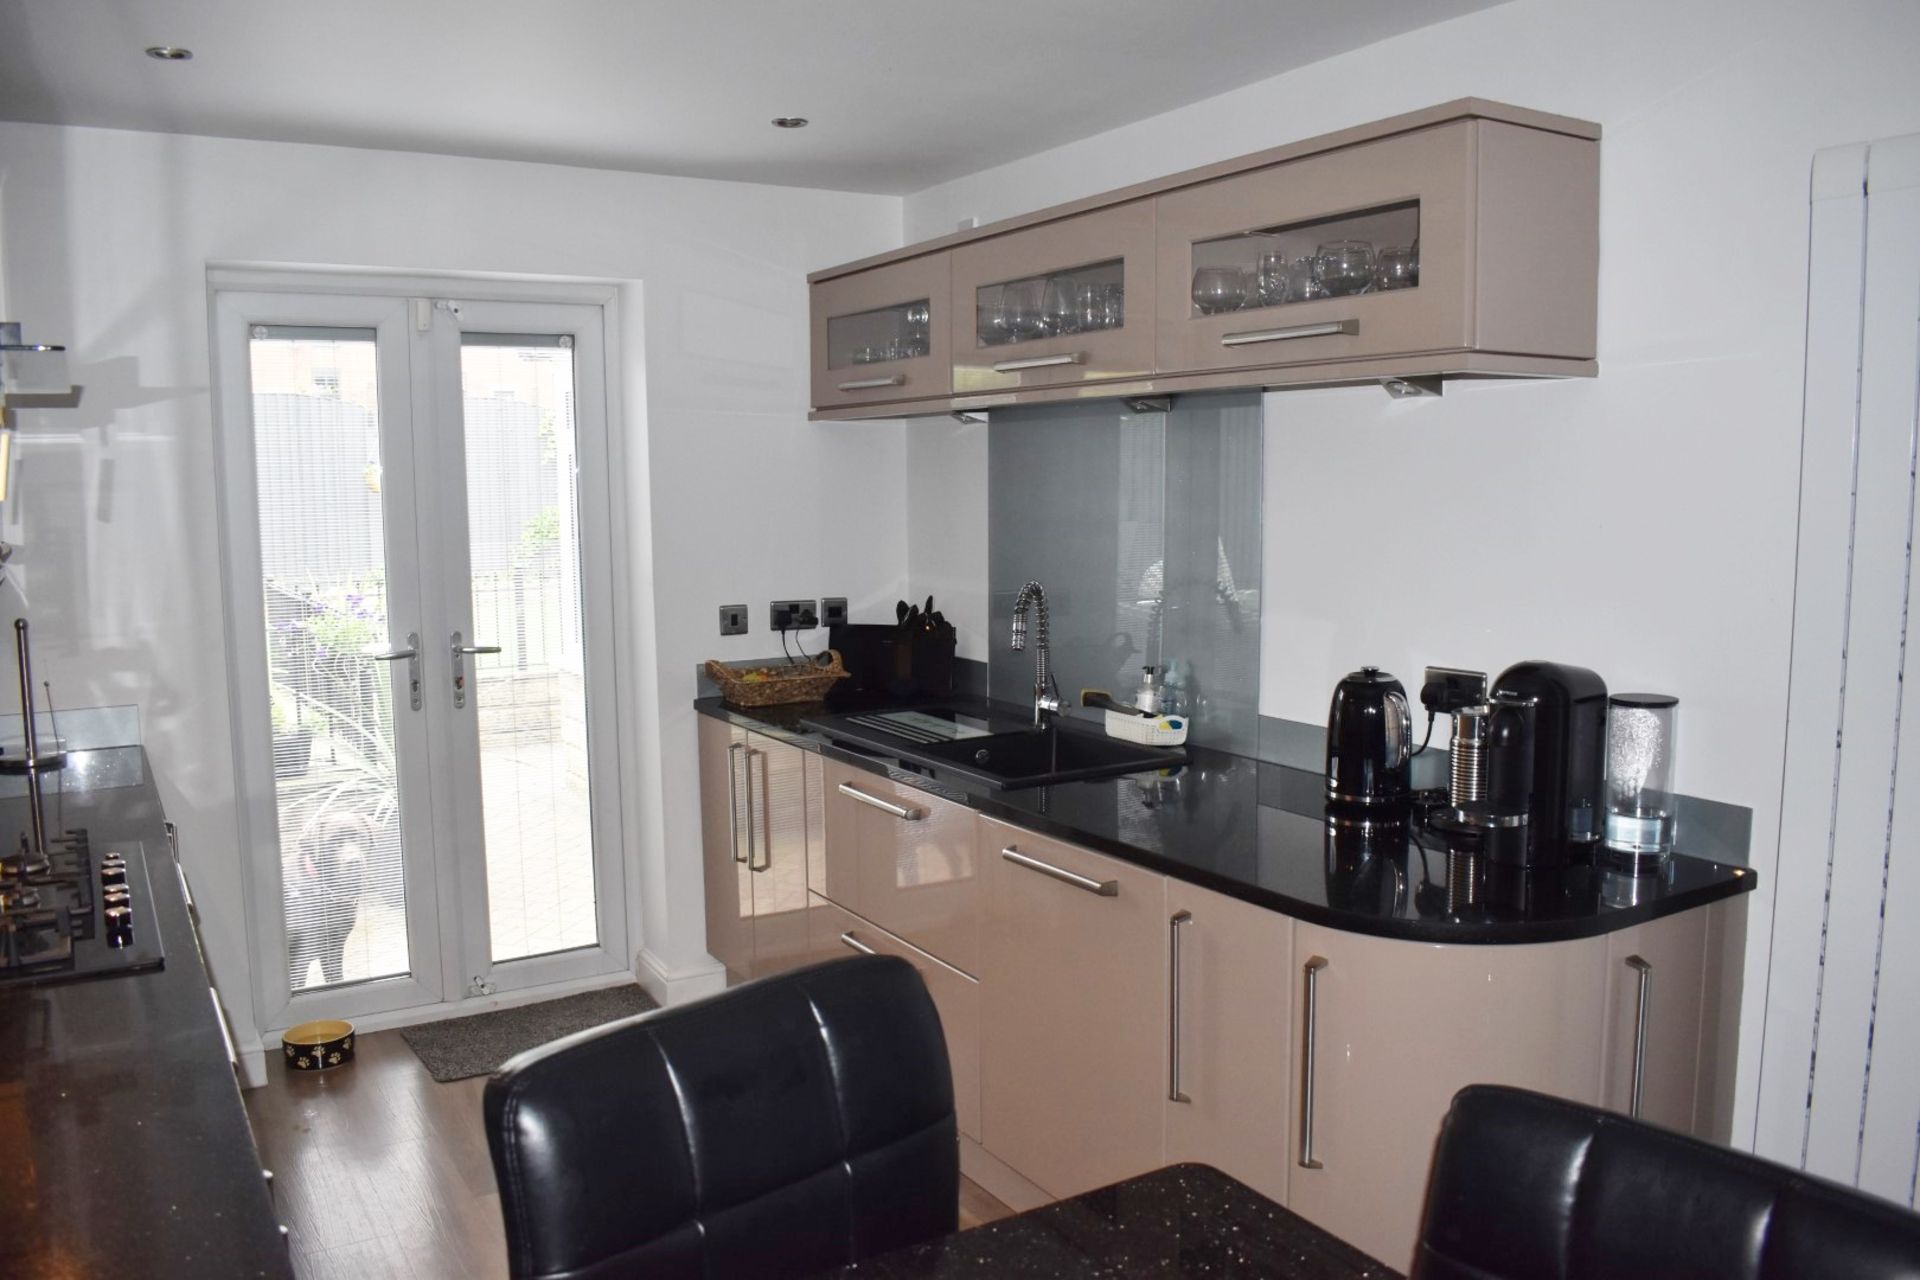 1 x Contemporary Mocha Fitted Kitchen Featuring Galaxy Granite Worktops, Breakfast Bar With Stools - Image 5 of 77